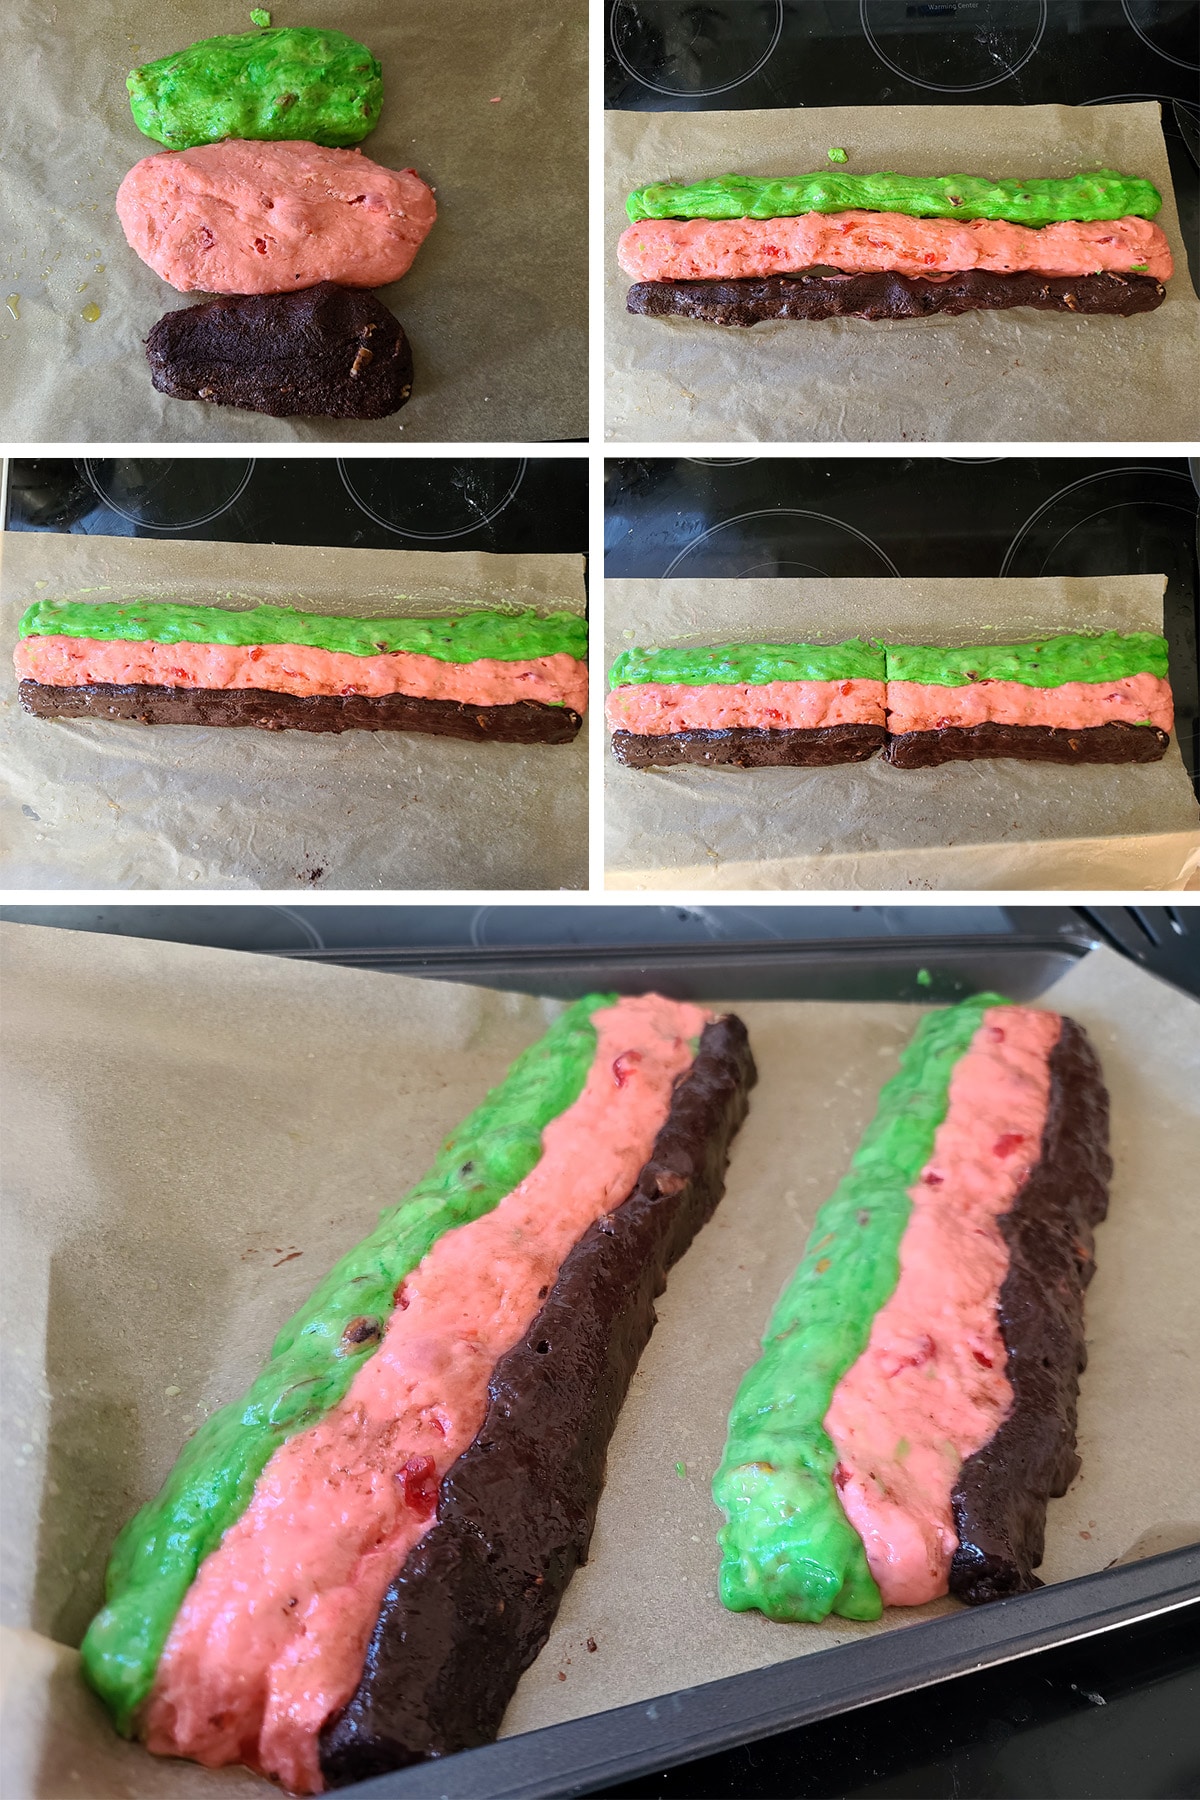 A 5 part image showing the tri coloured dough being arranged into 2 loaves, as described.